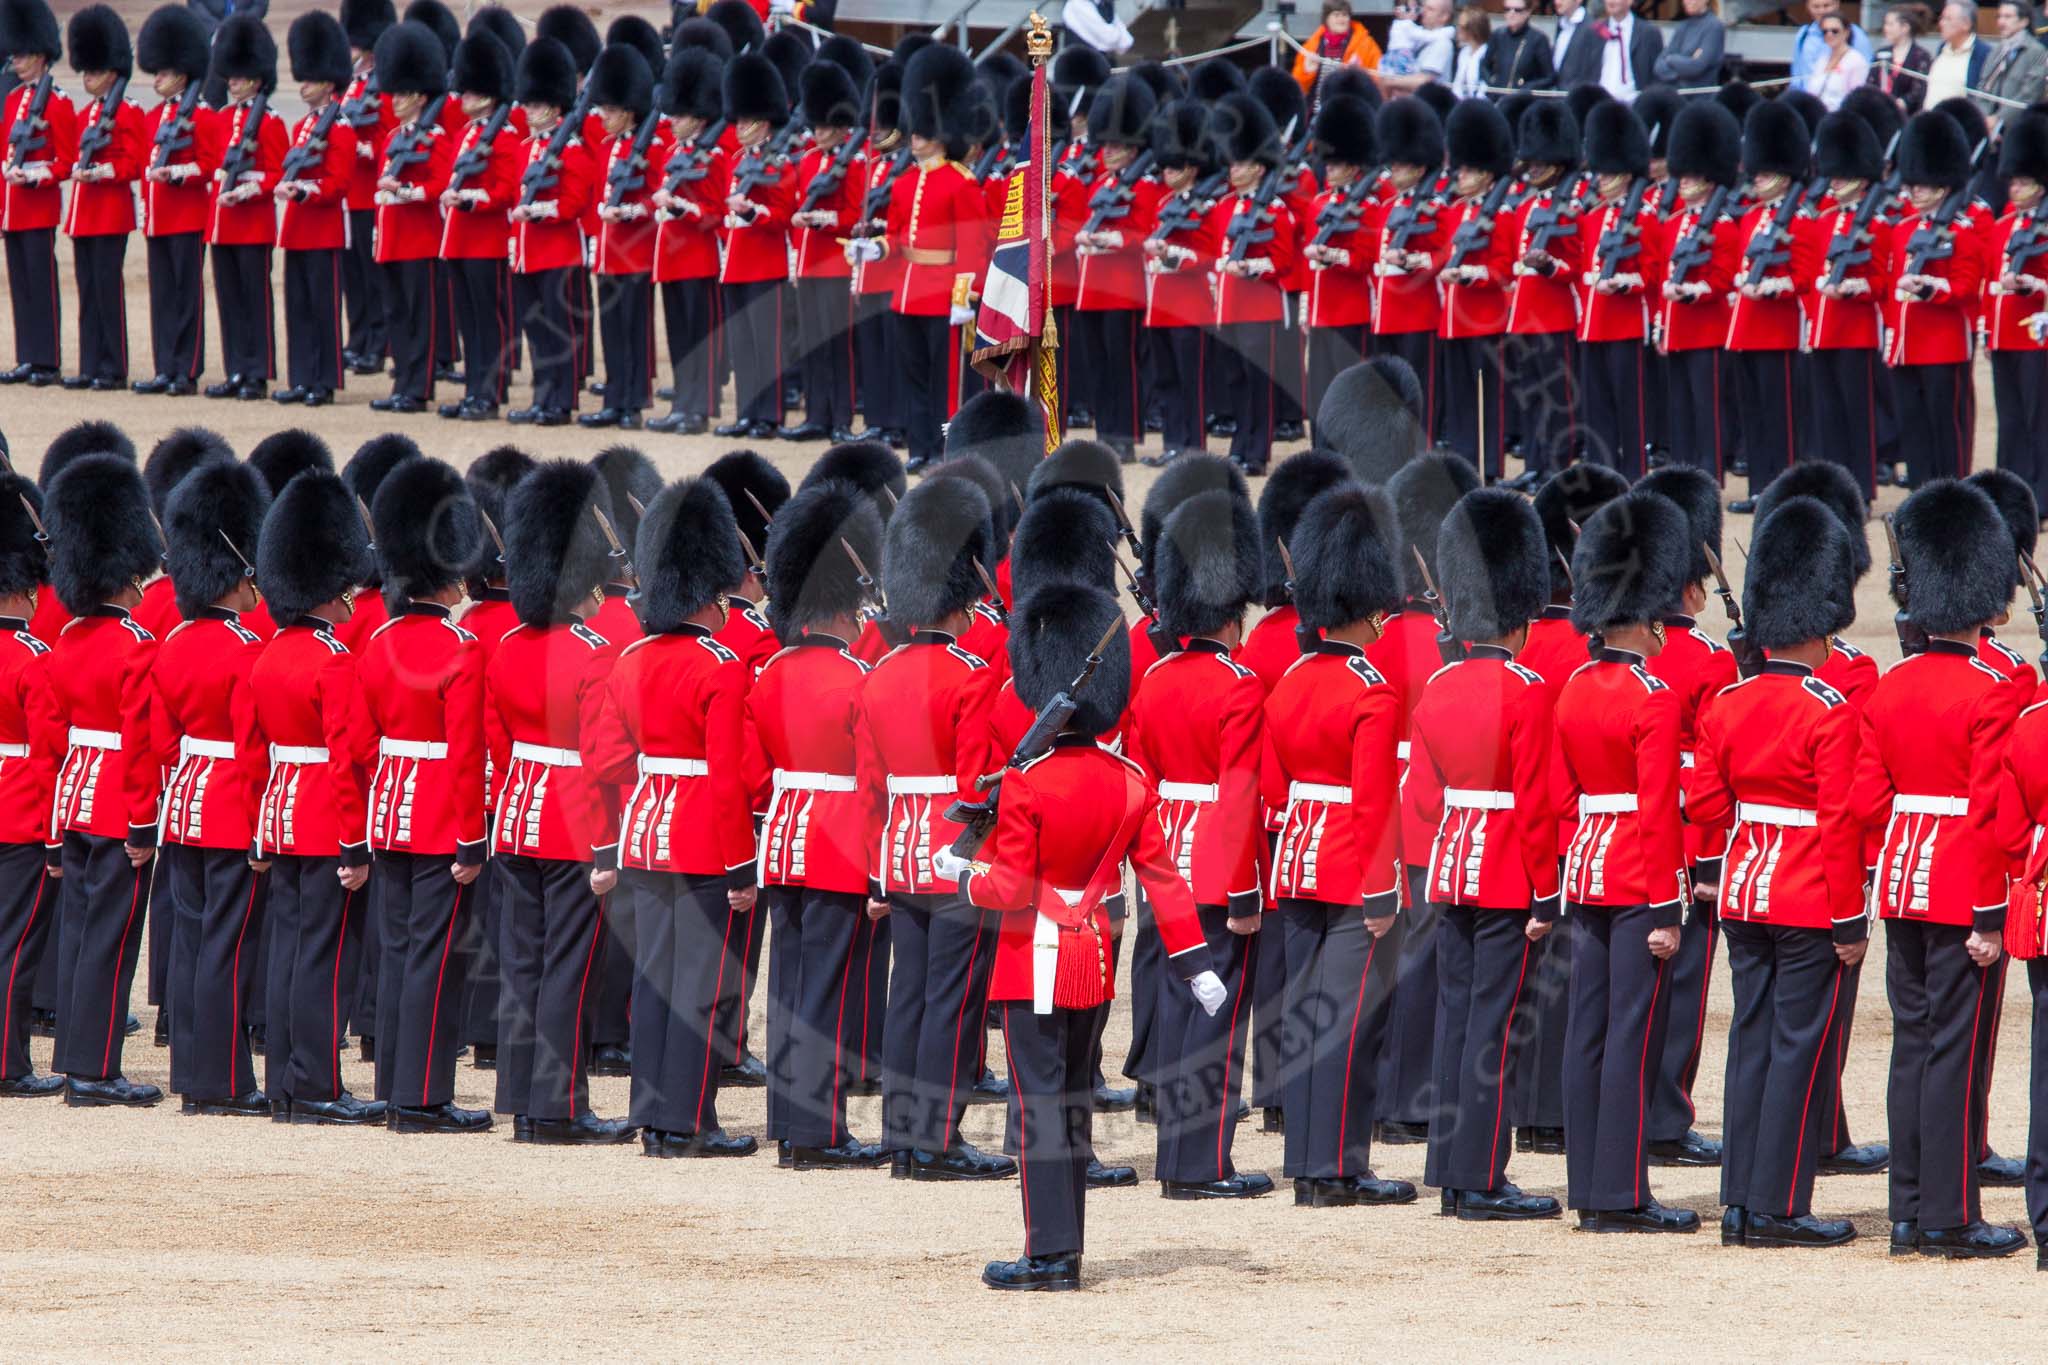 The Colonel's Review 2013: The Colour Party joins the Escort to the Colour, here Colour Sergeant, R J Heath, Welsh Guards, at the rear of the two lines of guardsmen..
Horse Guards Parade, Westminster,
London SW1,

United Kingdom,
on 08 June 2013 at 11:21, image #537